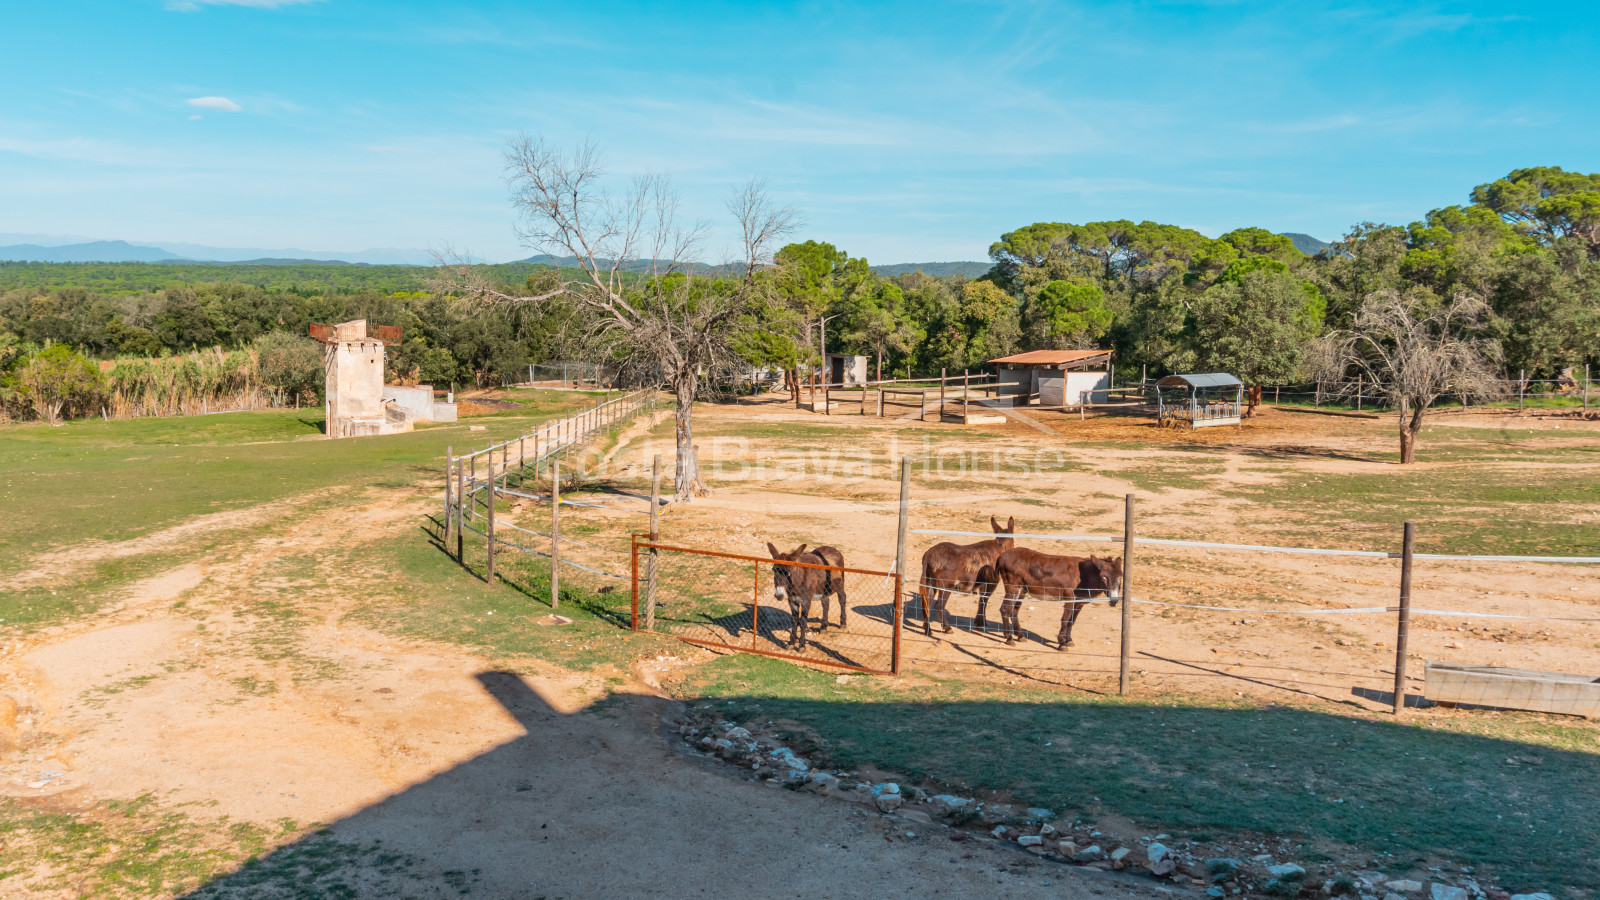 Rural tourism house for sale, between Llagostera and Romanyà de la Selva with 7 hectares of land